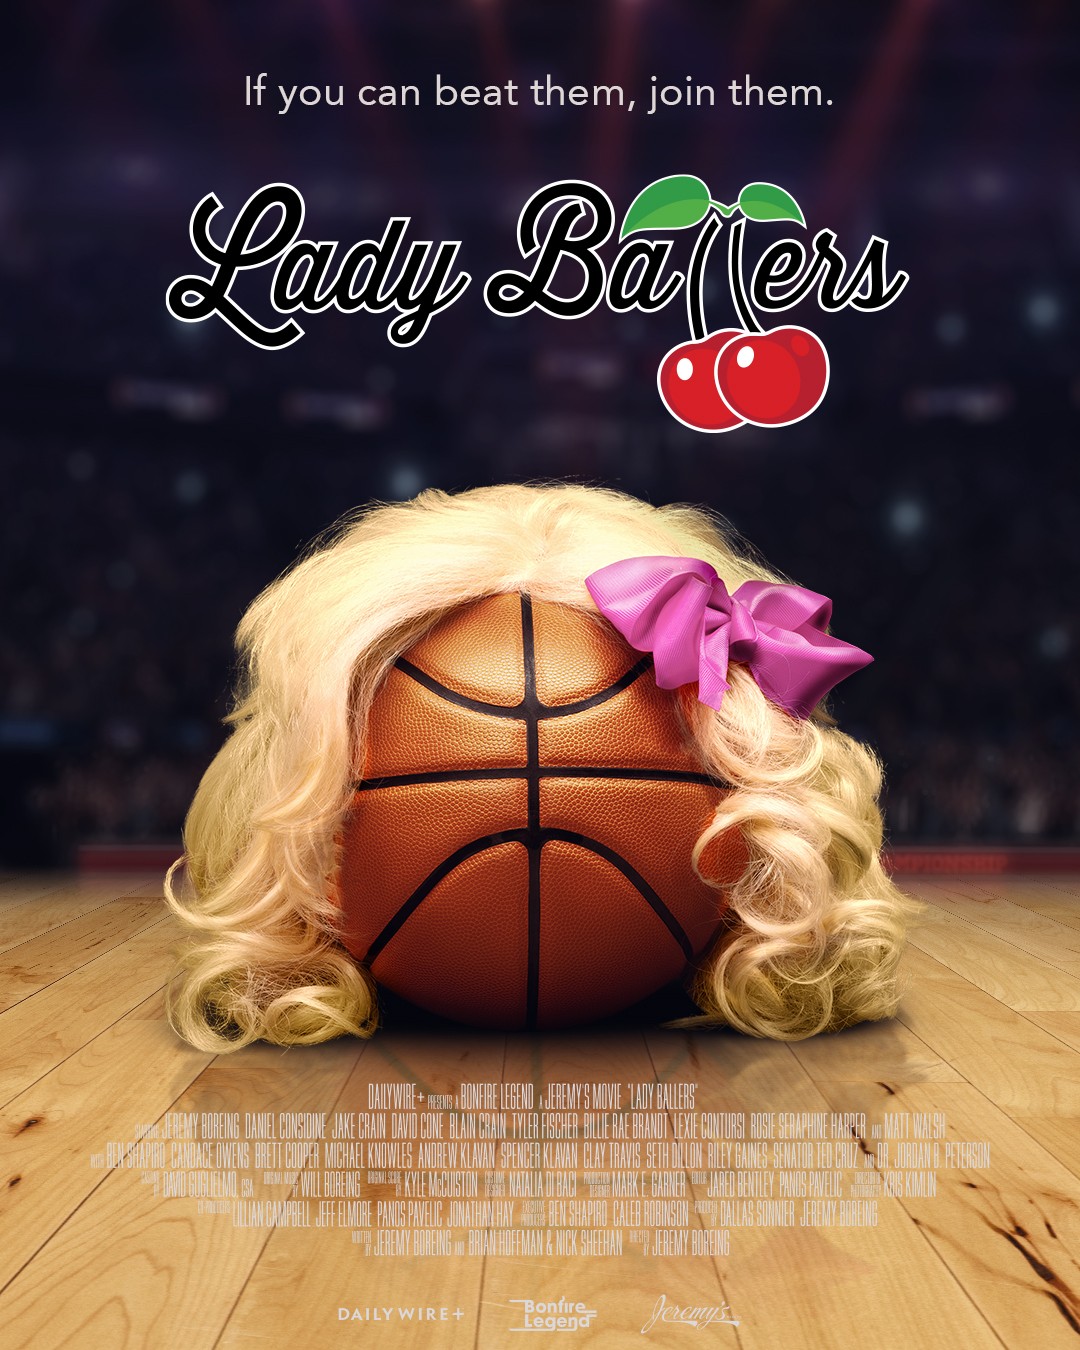 Lady Ballers Trailer Trailers & Videos Rotten Tomatoes